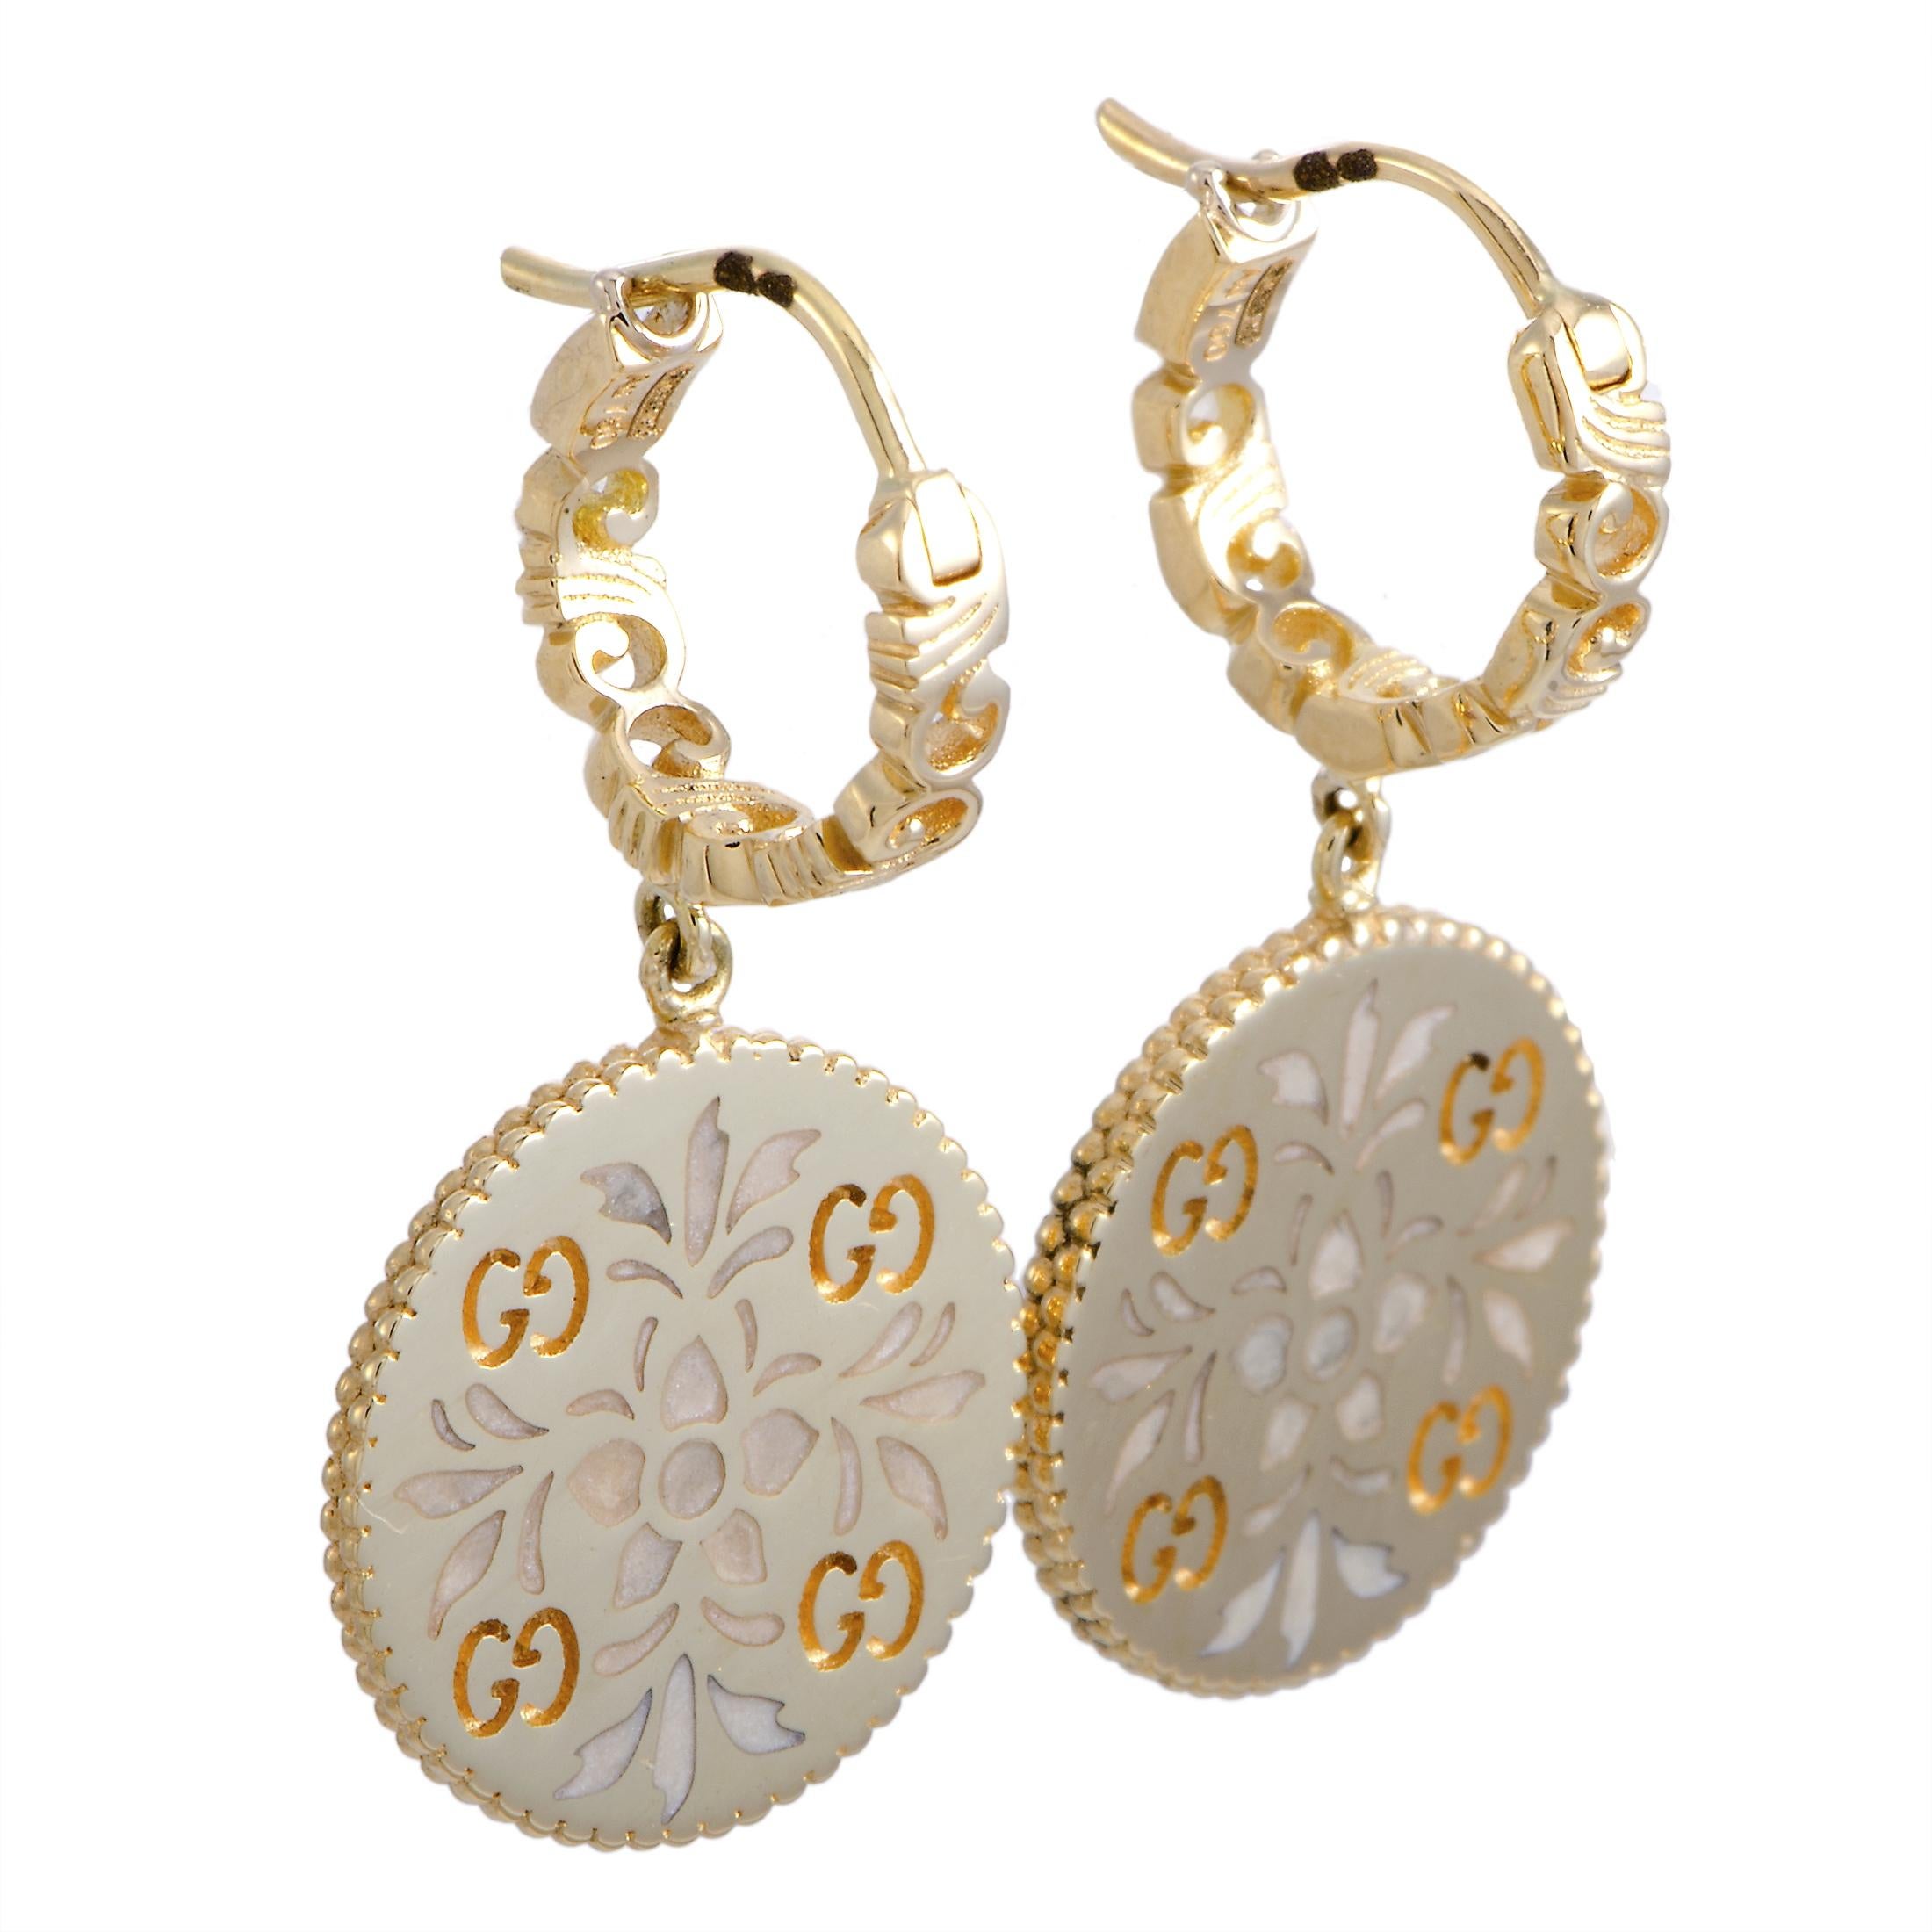 The Gucci “Icon Blooms” earrings are made out of 18K yellow gold and enamel and each of the two weighs 4 grams. The earrings measure 1” in length and 0.50” in width.
 
 Offered in brand new condition, this pair of earrings includes the